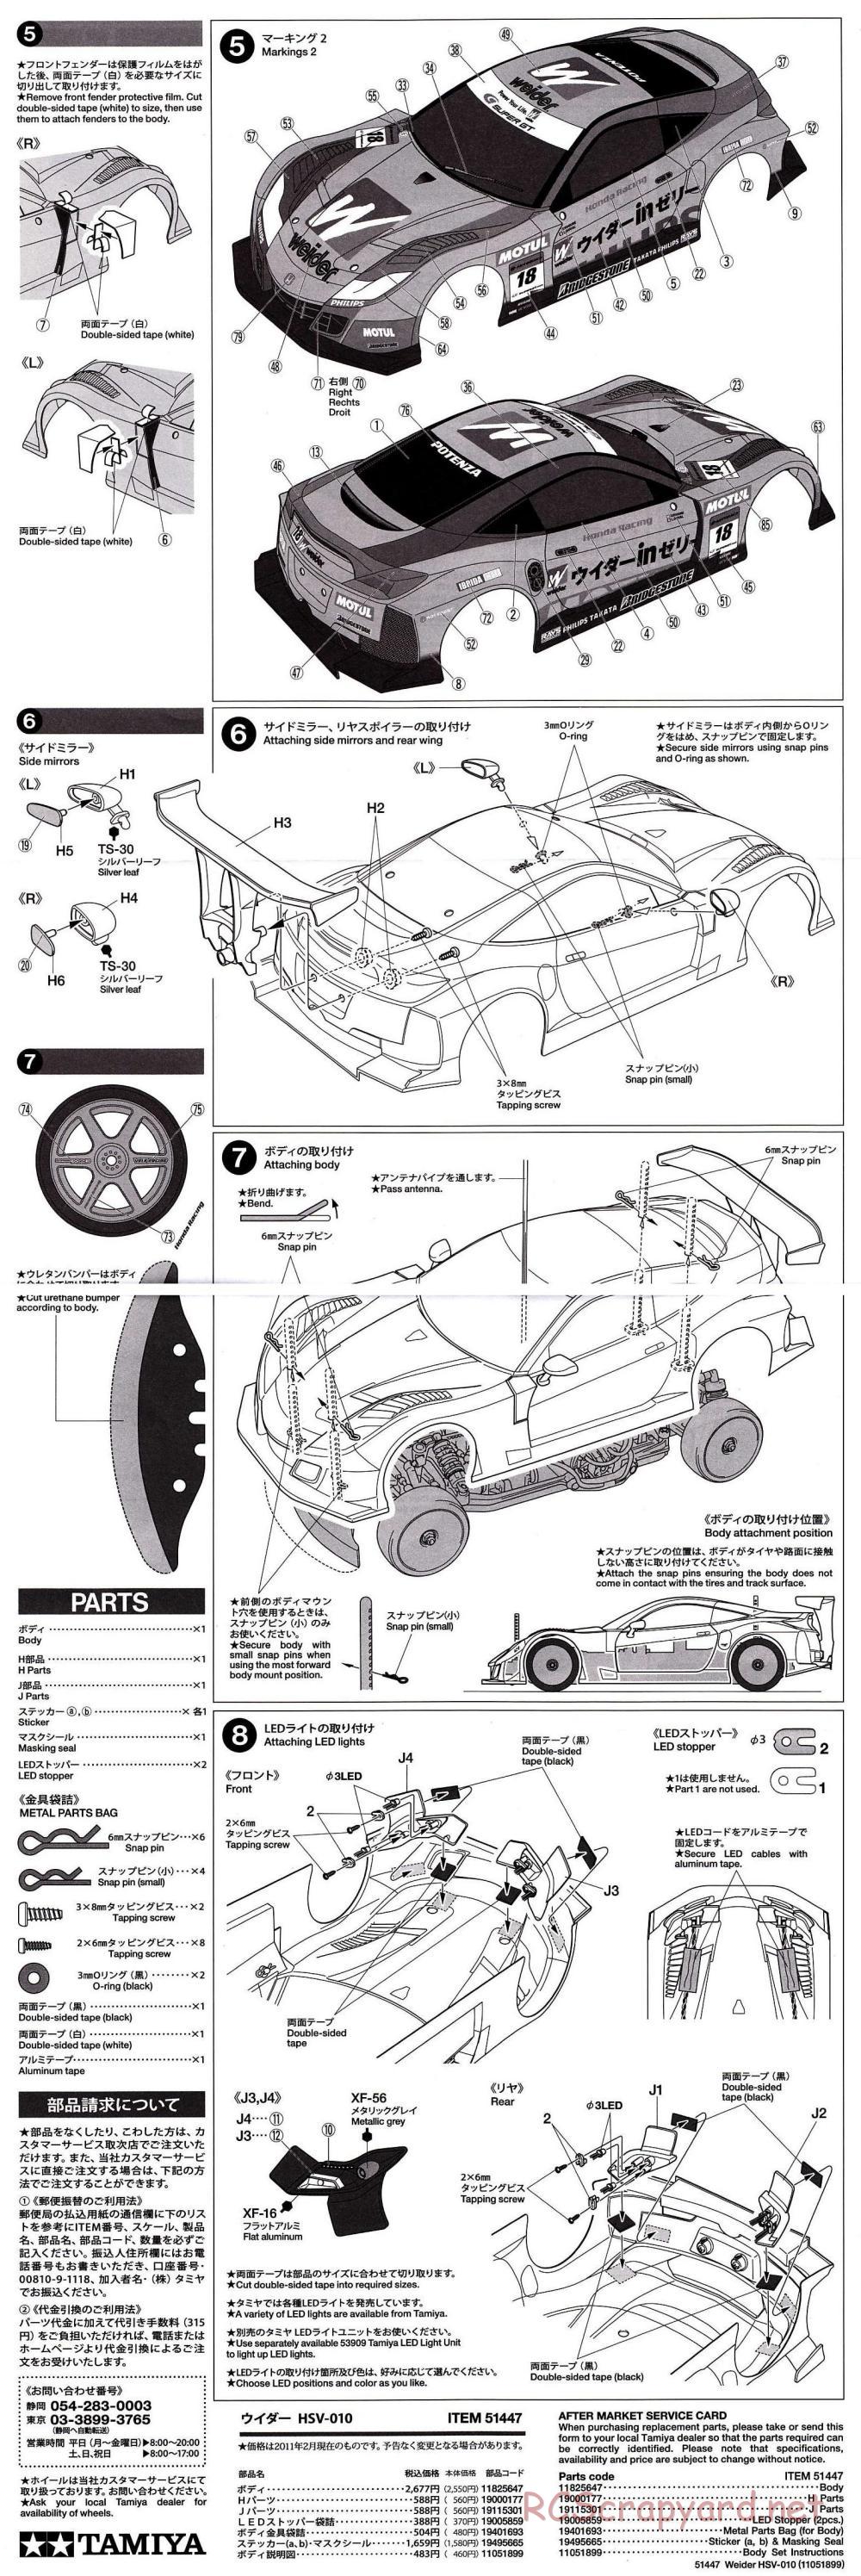 Tamiya - Weider HSV-010 - TA05 Ver.II Chassis - Body Manual - Page 2